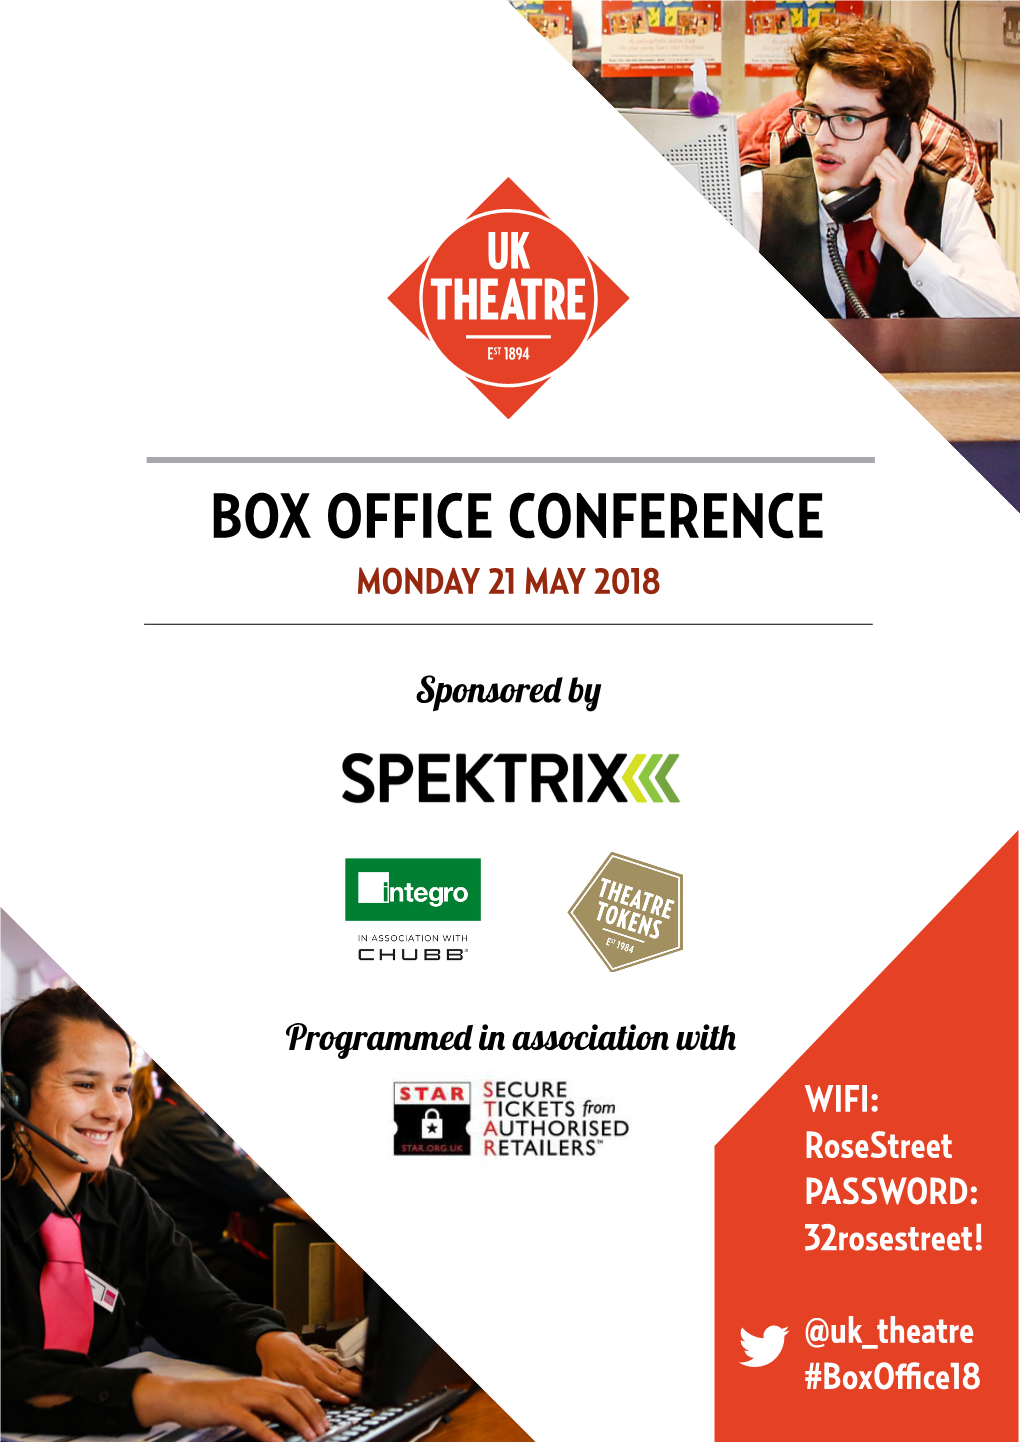 Box Office Conference Monday 21 May 2018